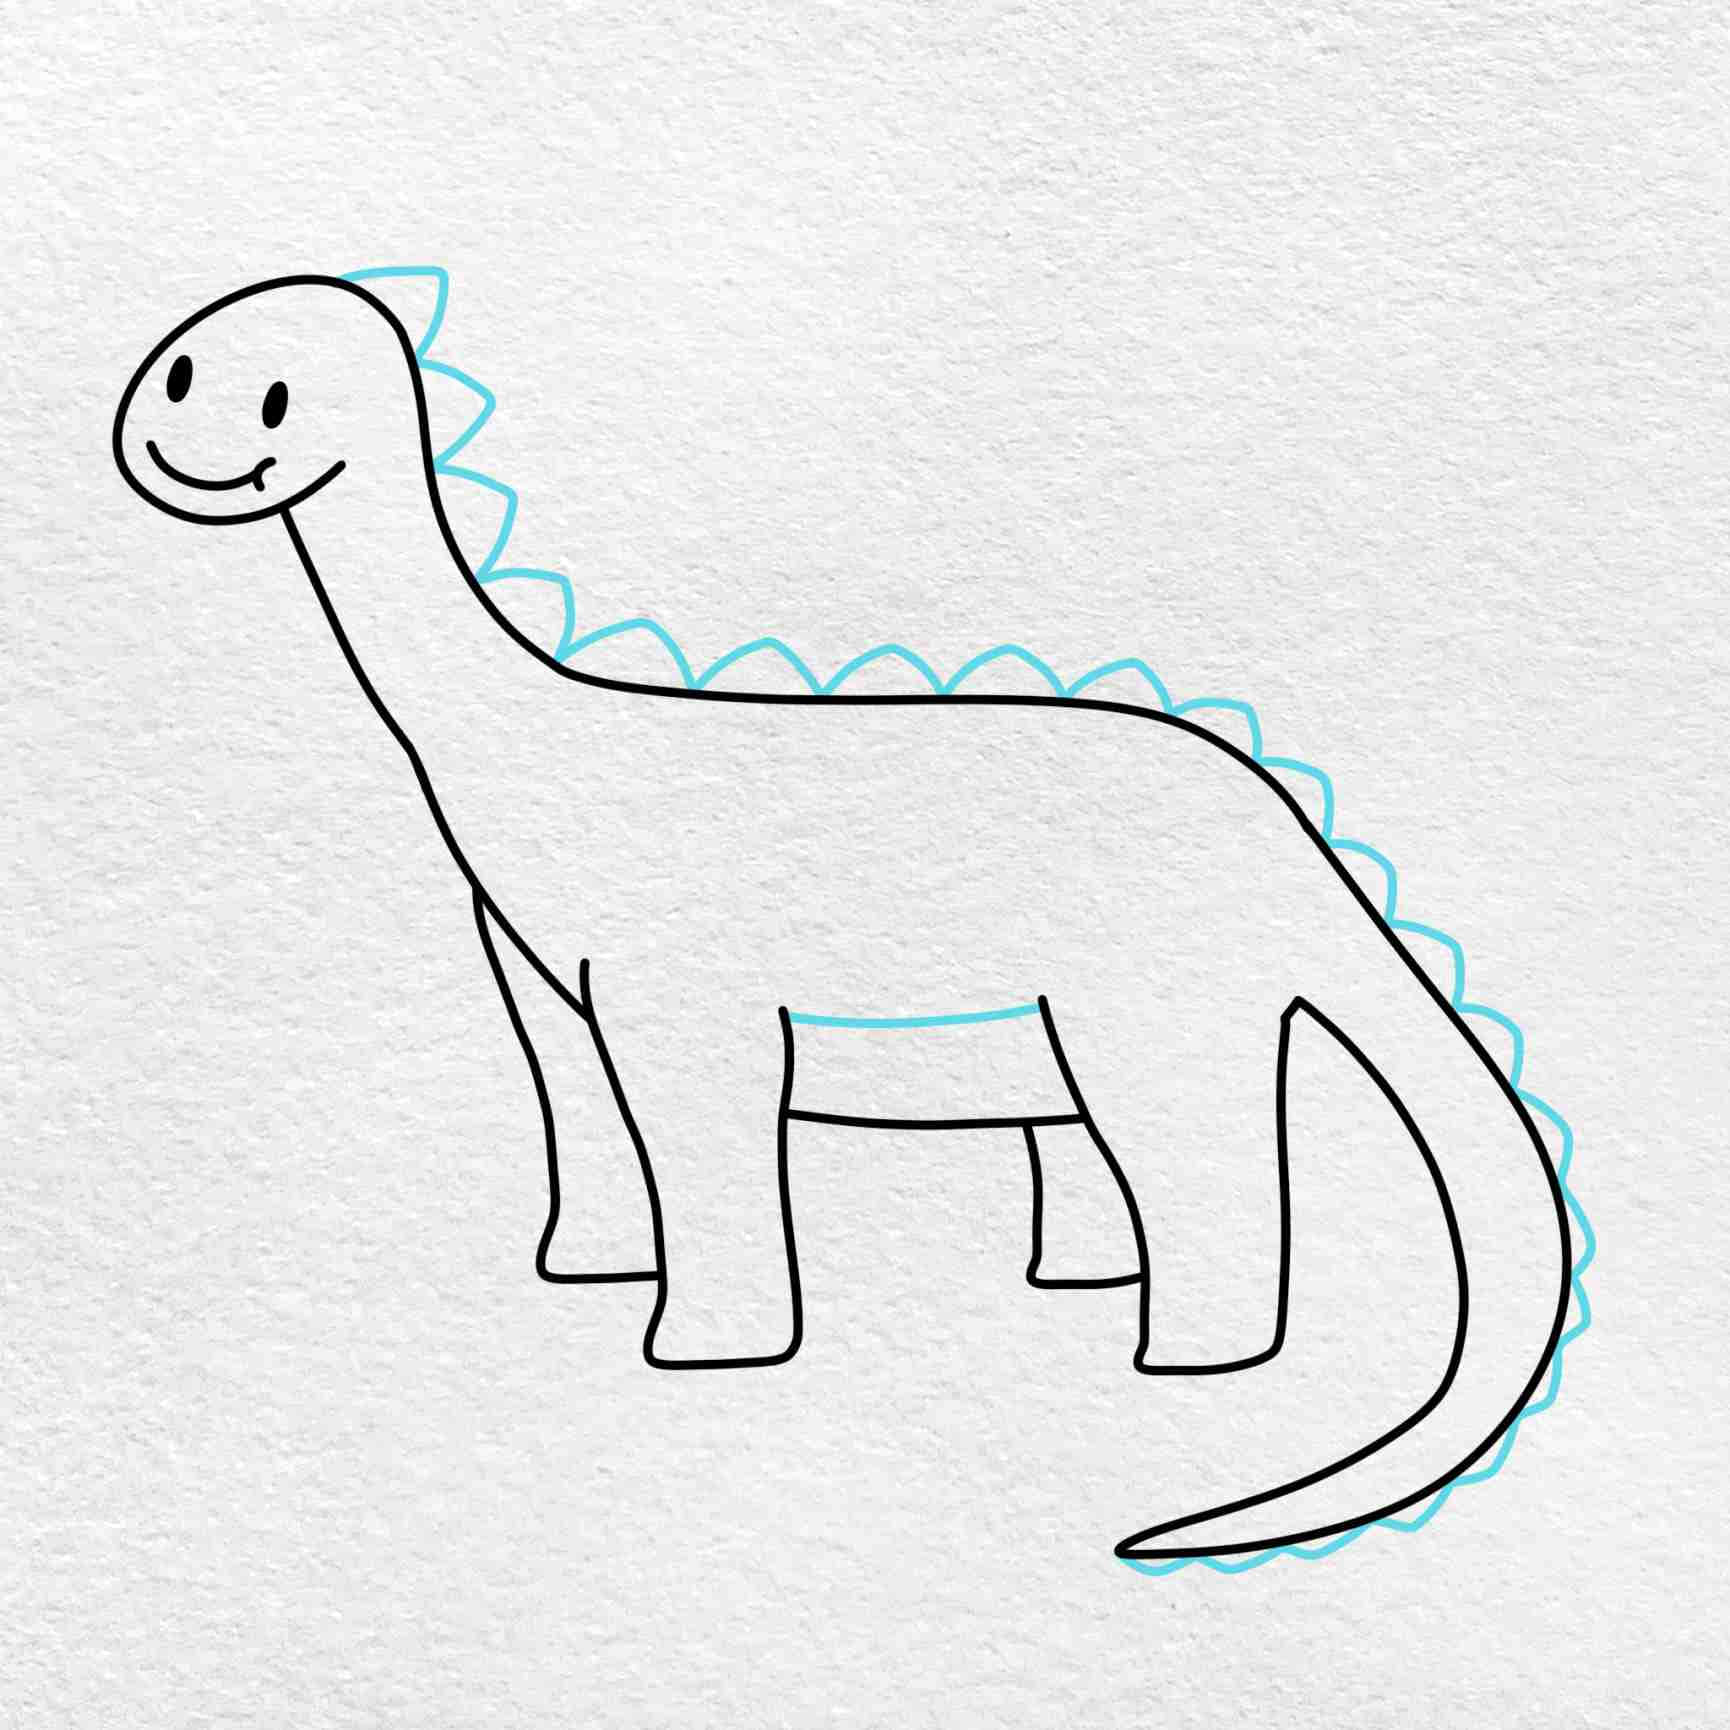 Explore the prehistoric world with this realistic dinosaur drawing.